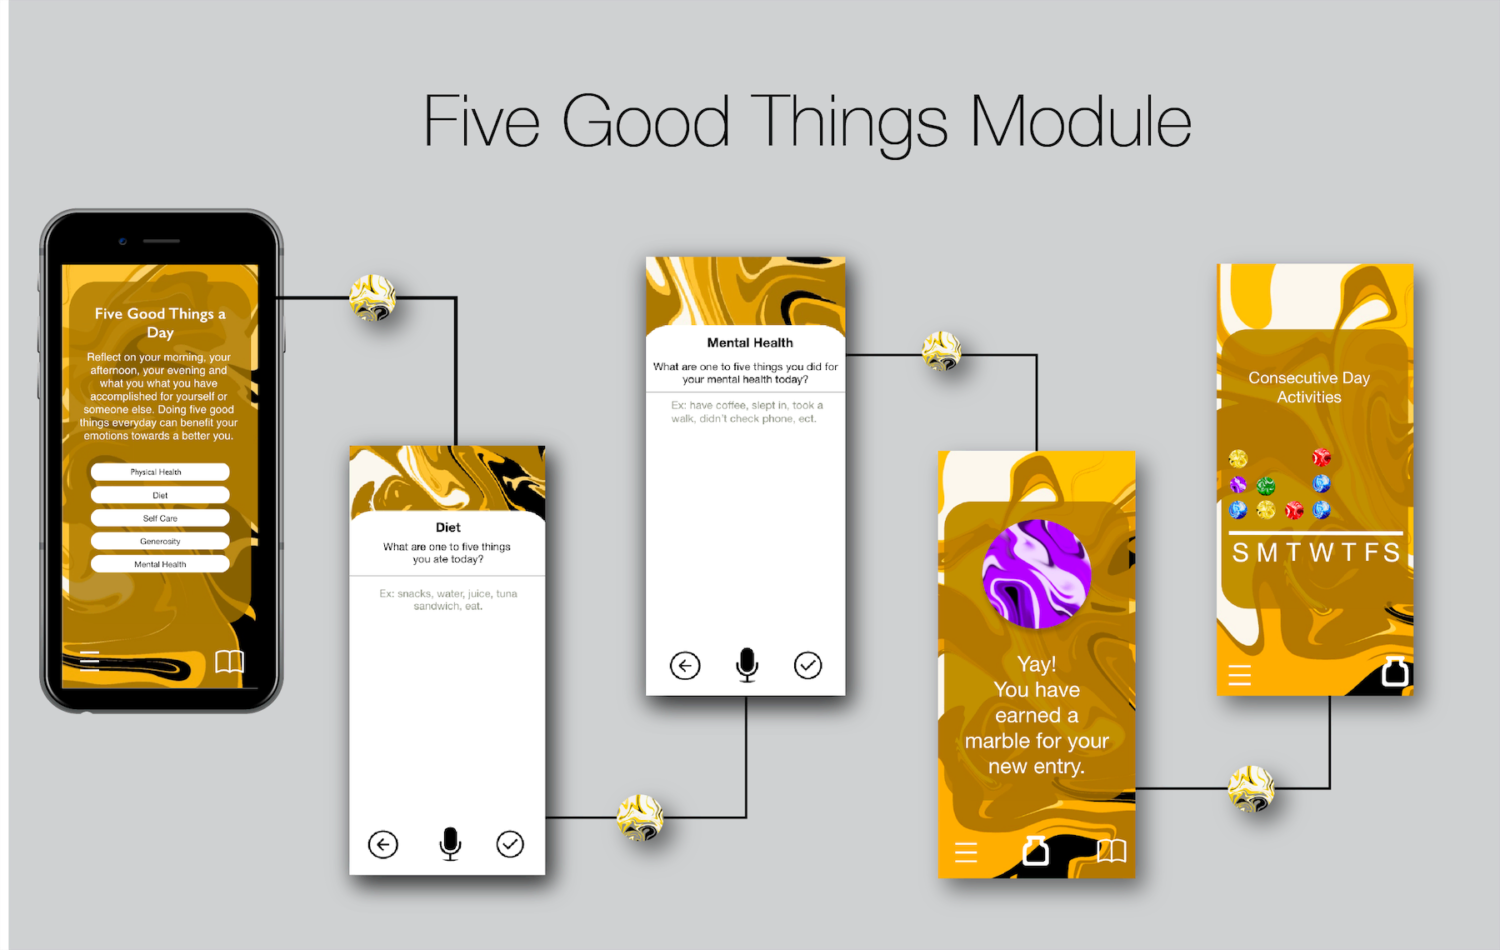 The Five Good Things Module is depicted in the image above detailing the specific way a user runs through the module. They first begin by picking a prompt to write about then are taken to a second screen which showcases a white page for the user to write their thoughts down. 